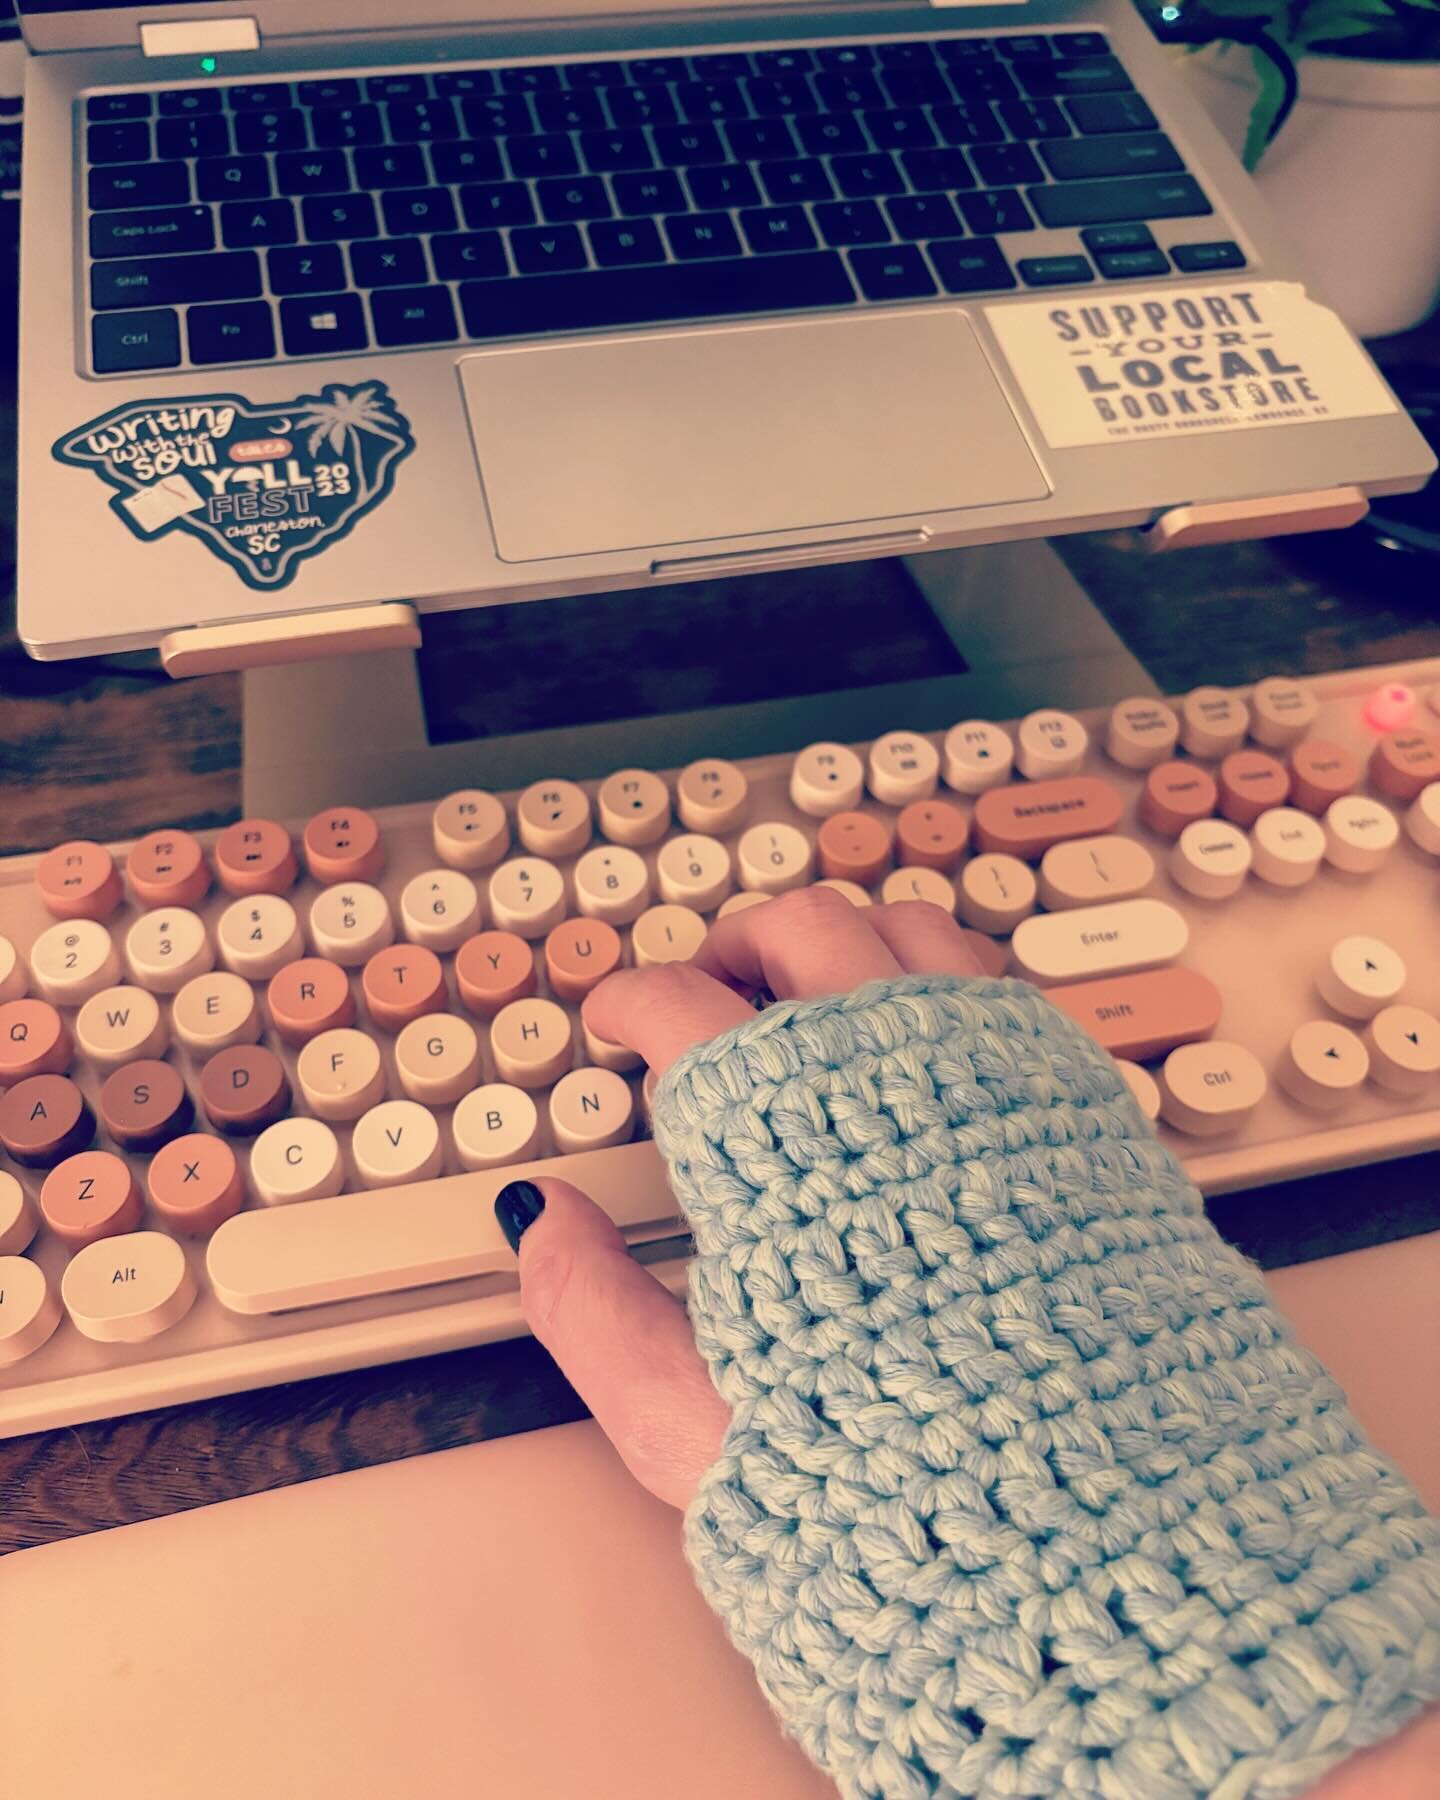 Got in some words today with @re_jenks and @amandalinsmeier wearing my new writing gloves made by @jedwardswhiteoak ❤️ They are saving my hands this winter in my frigid basement! I think Jenn still makes these to order if anyone is interested!
@wwts.